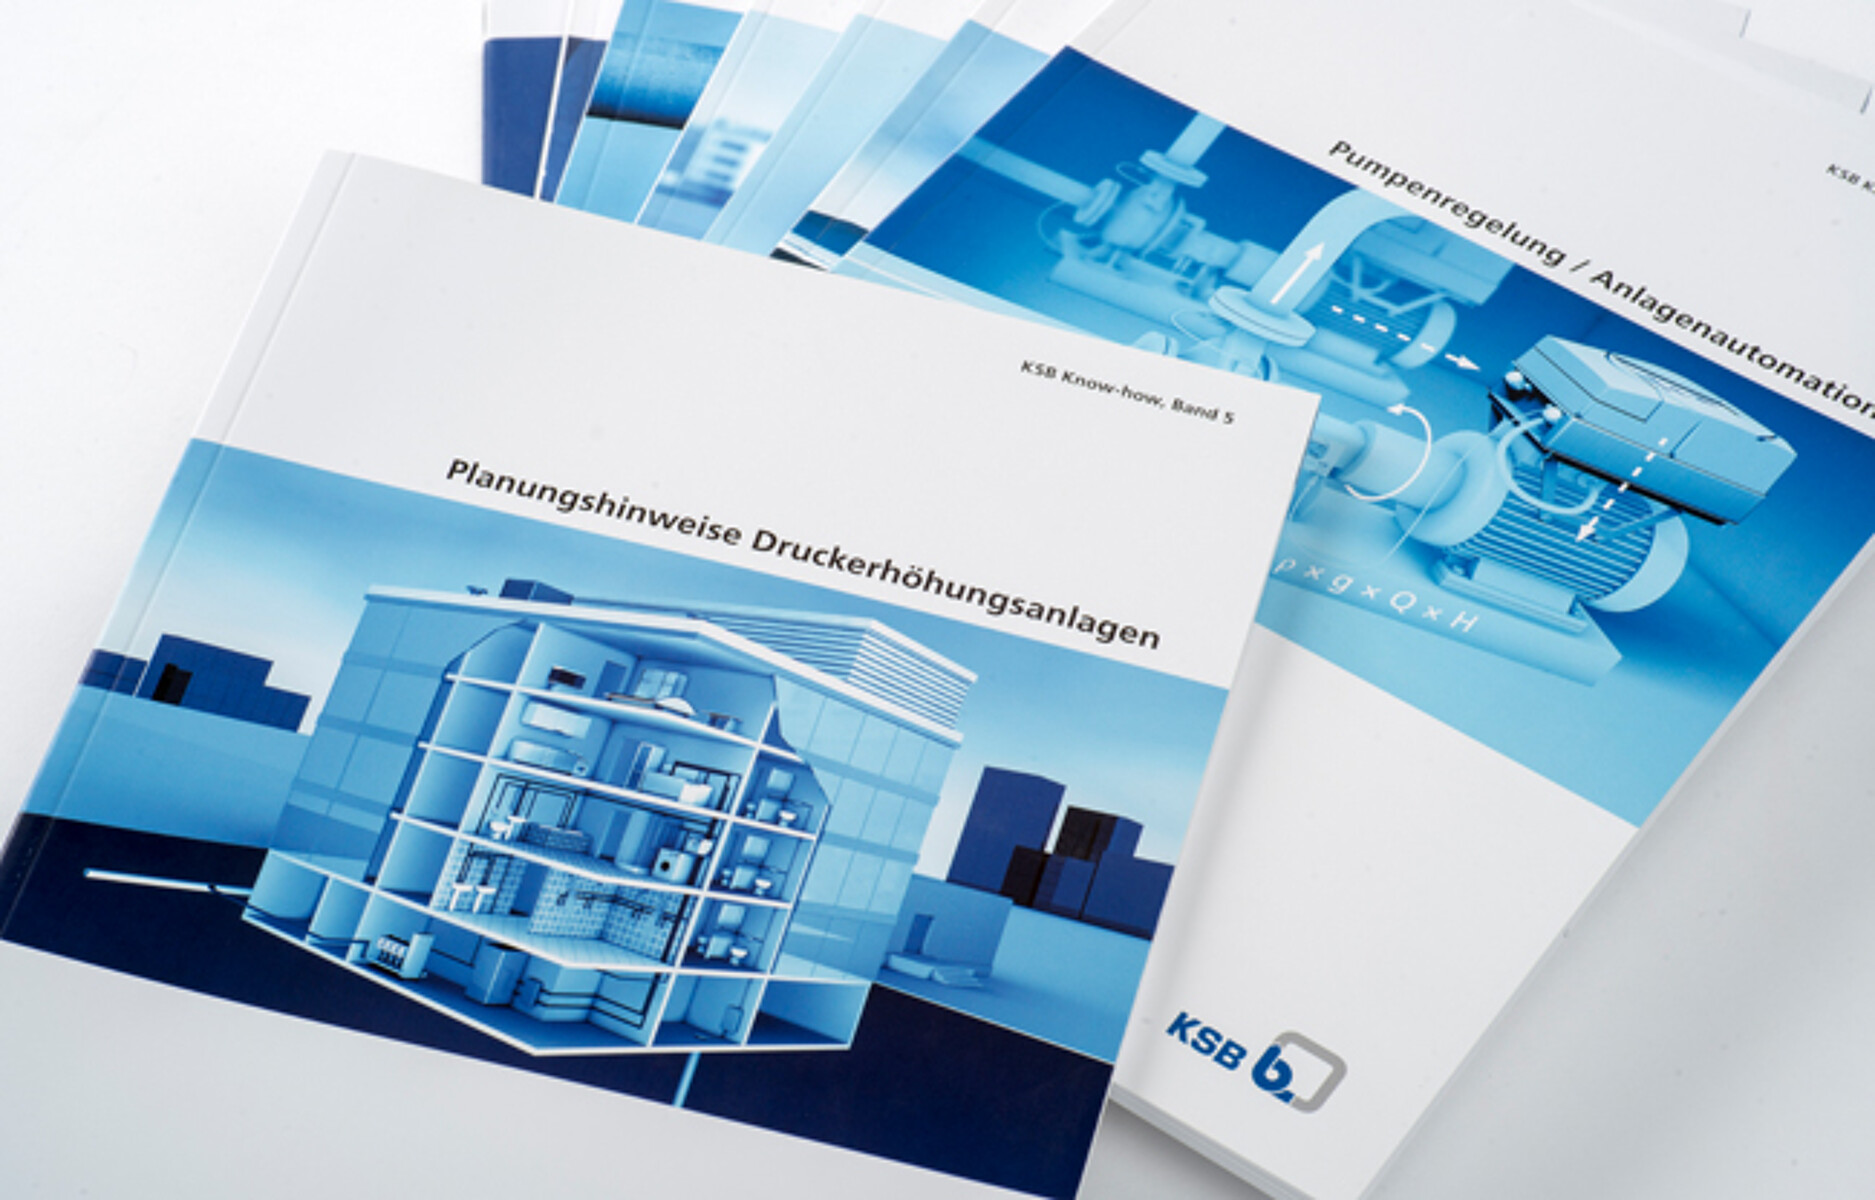 Various KSB know-how brochures